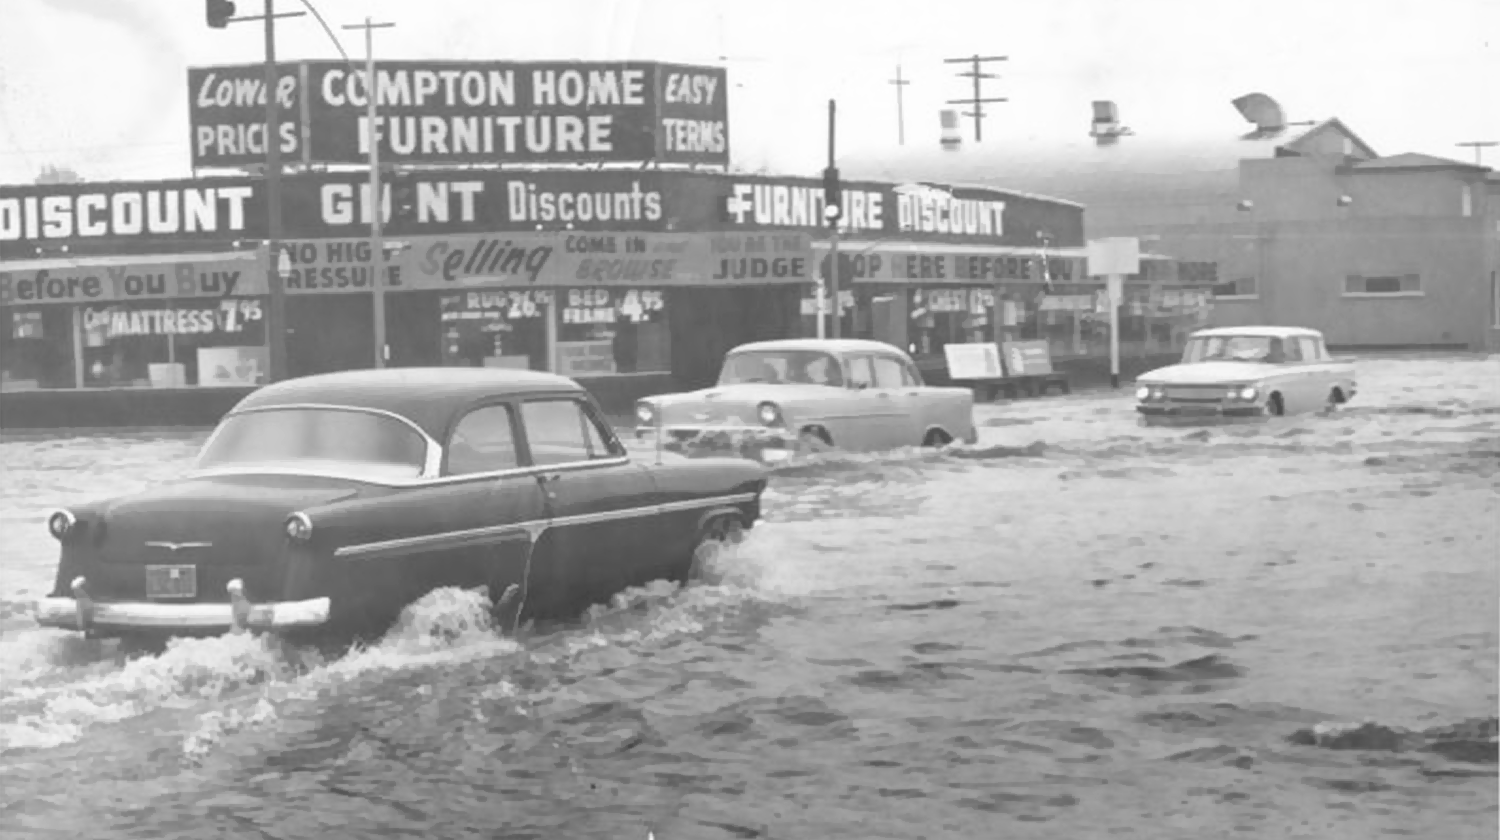 Flooded streets in the City of Compton.